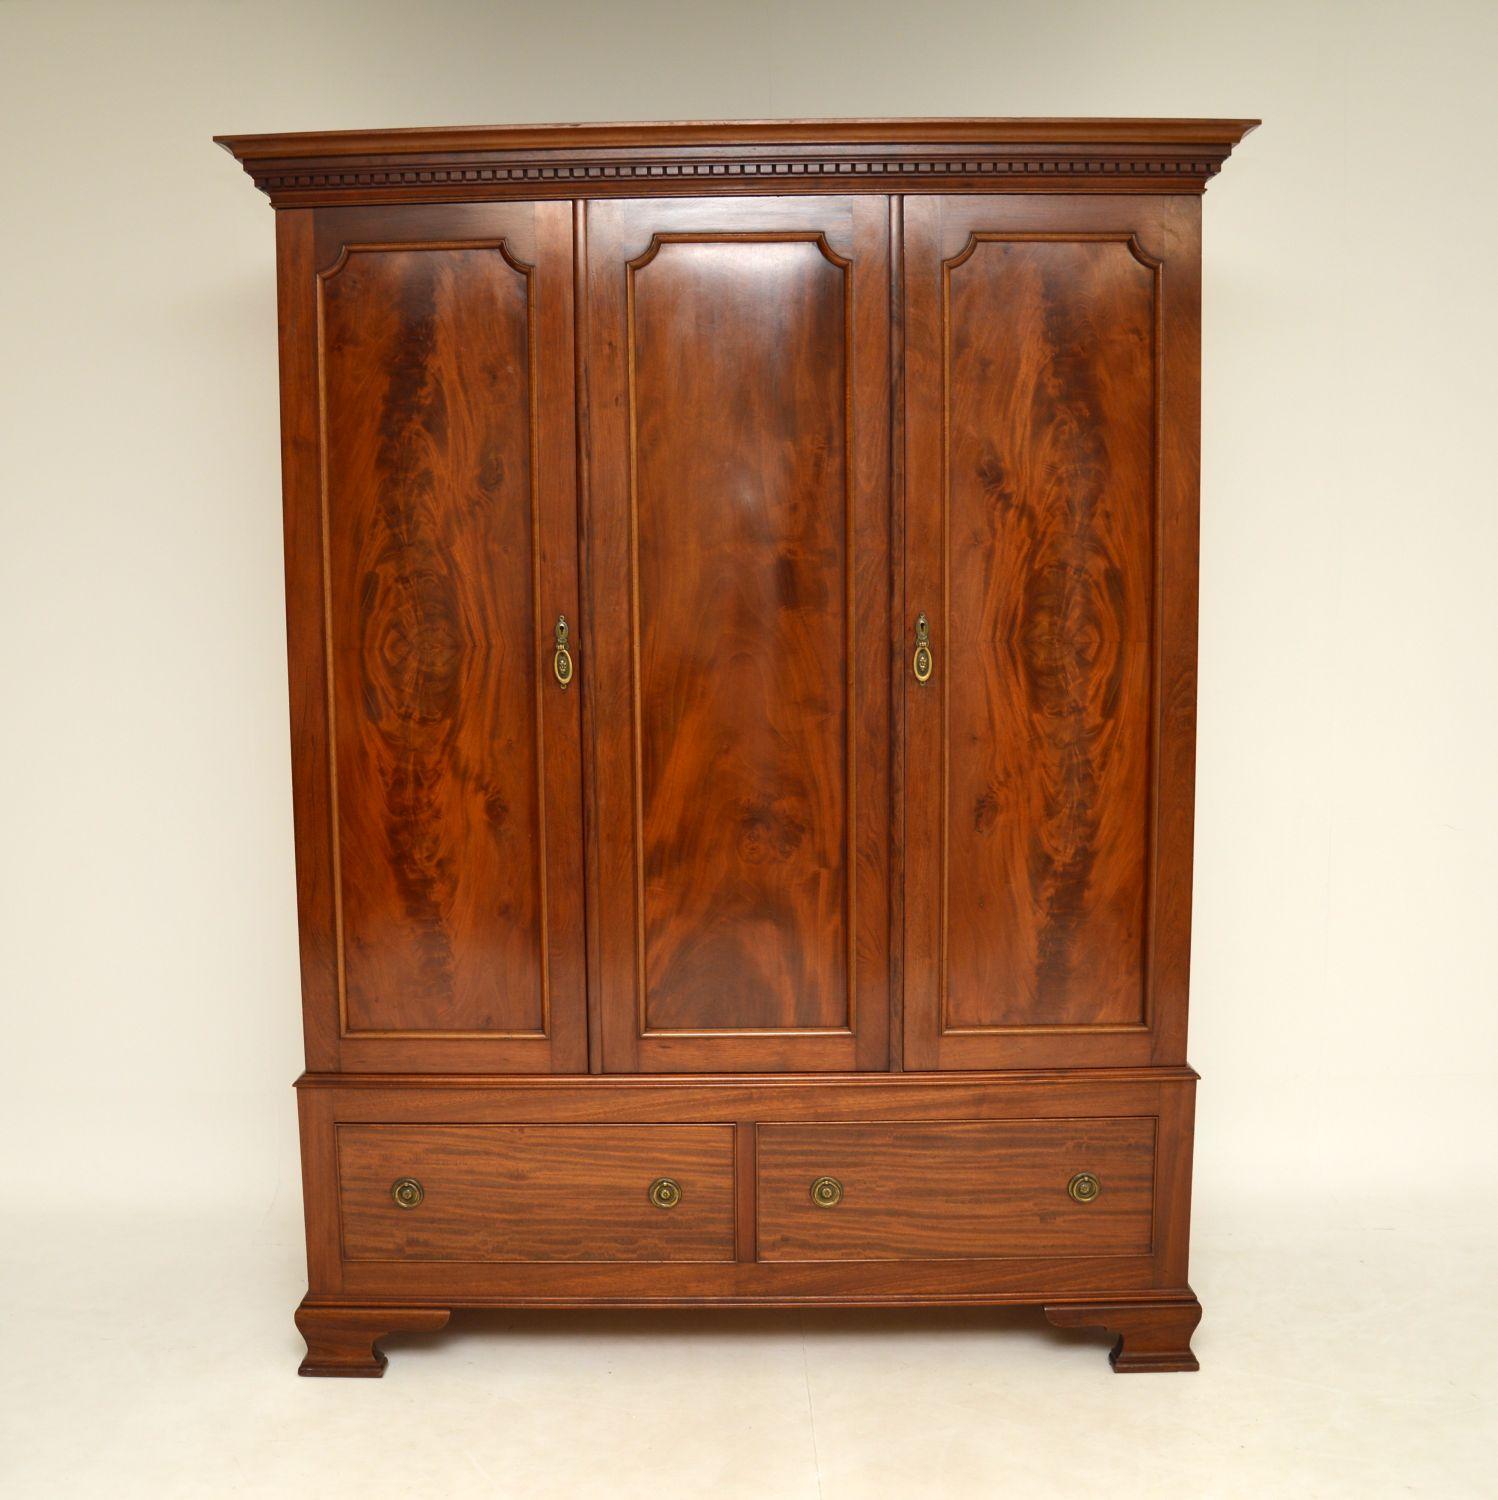 A beautiful and very impressive antique Georgian style period mahogany three door wardrobe. This was made in England & it dates from around the 1880-1900 period.

The condition is absolutely superb for its age. This has been extremely well kept &